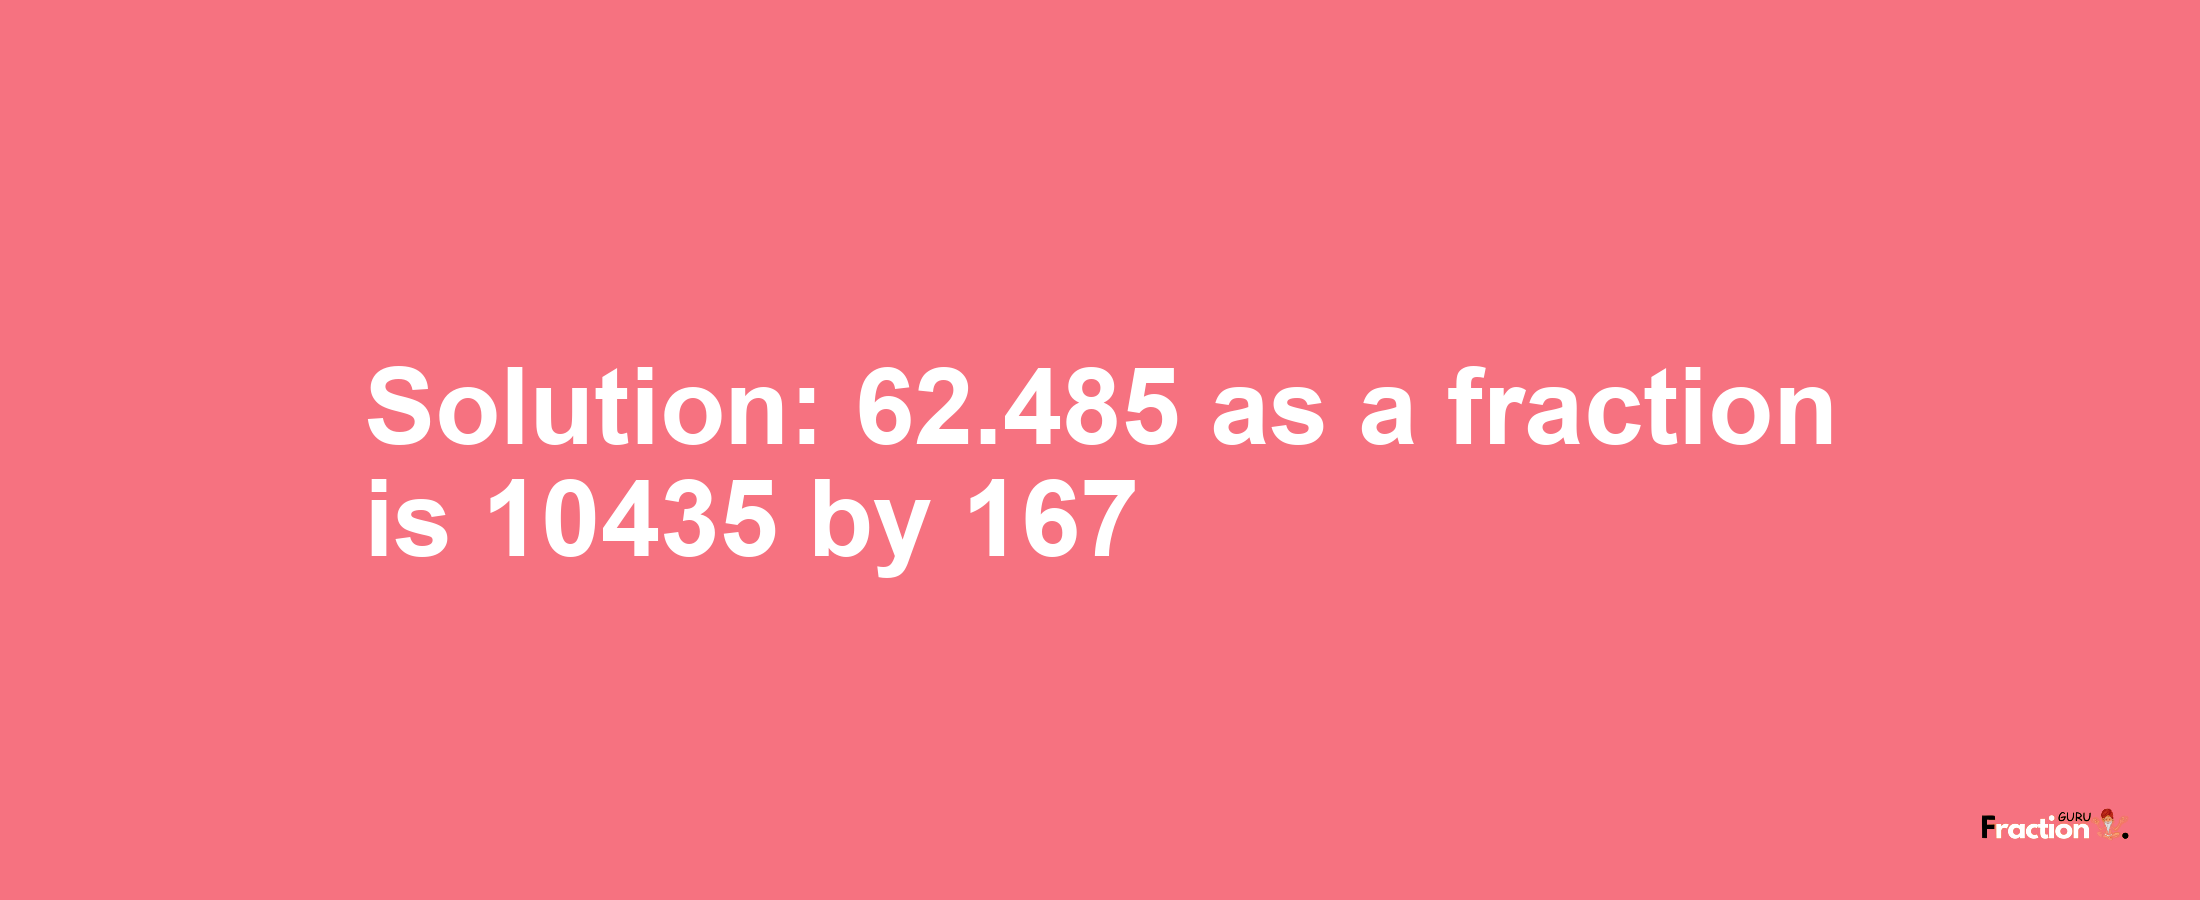 Solution:62.485 as a fraction is 10435/167